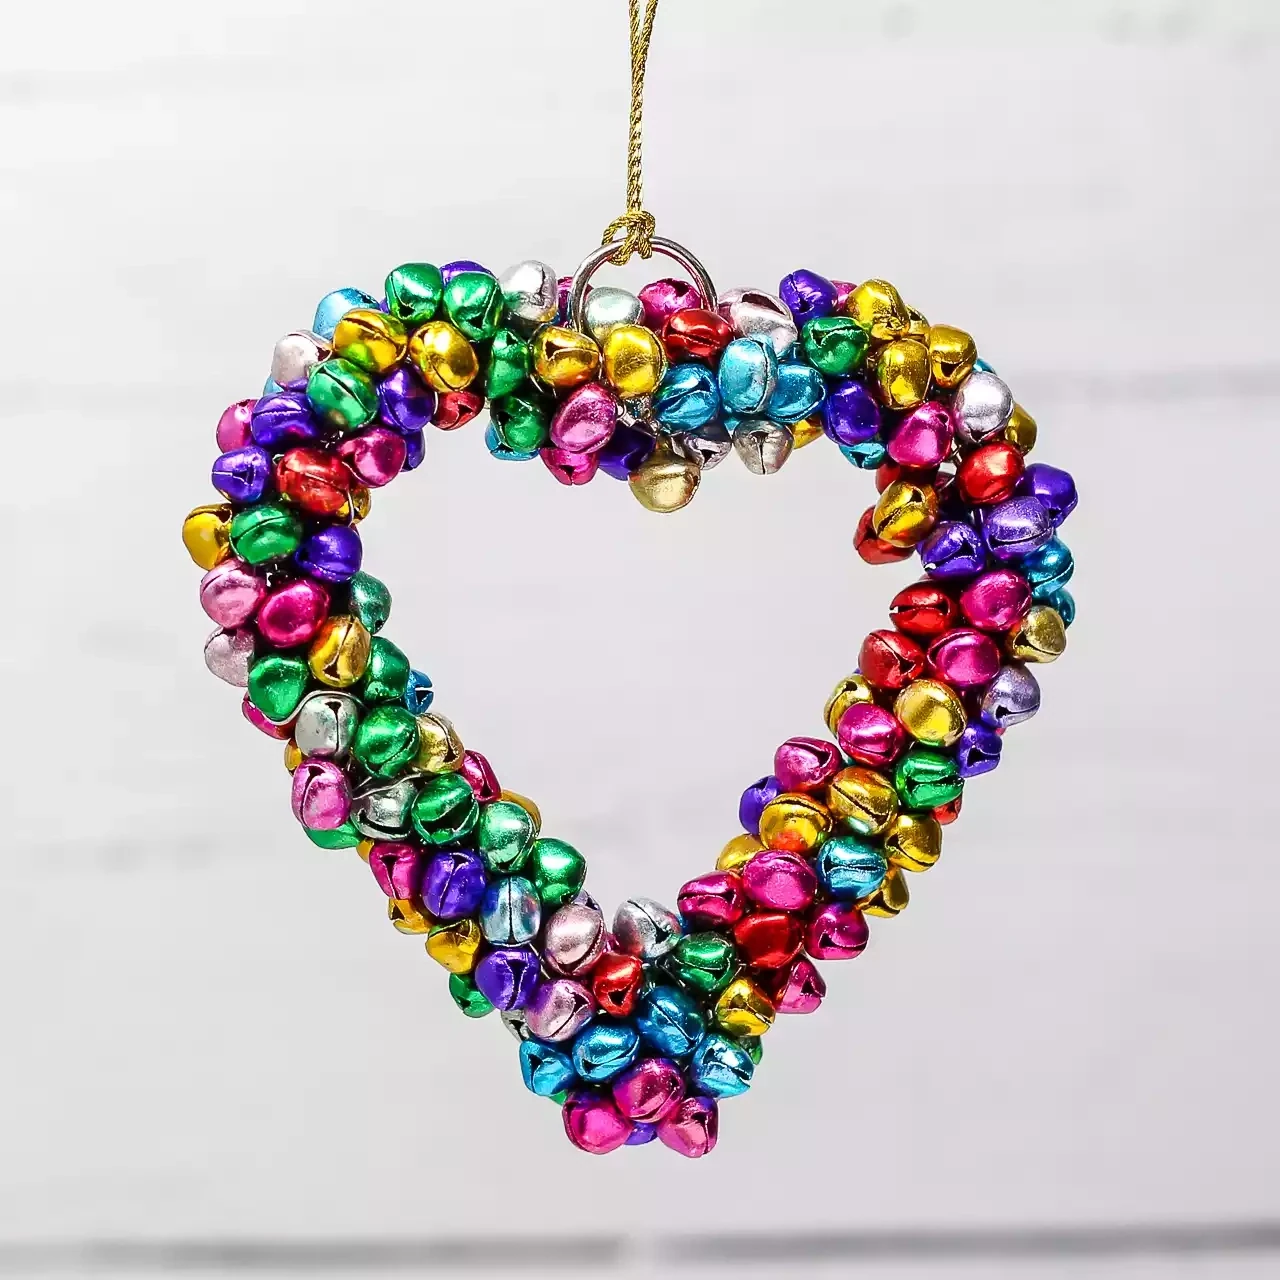 Singing Bell Hanging Heart Decoration - Small by Namaste